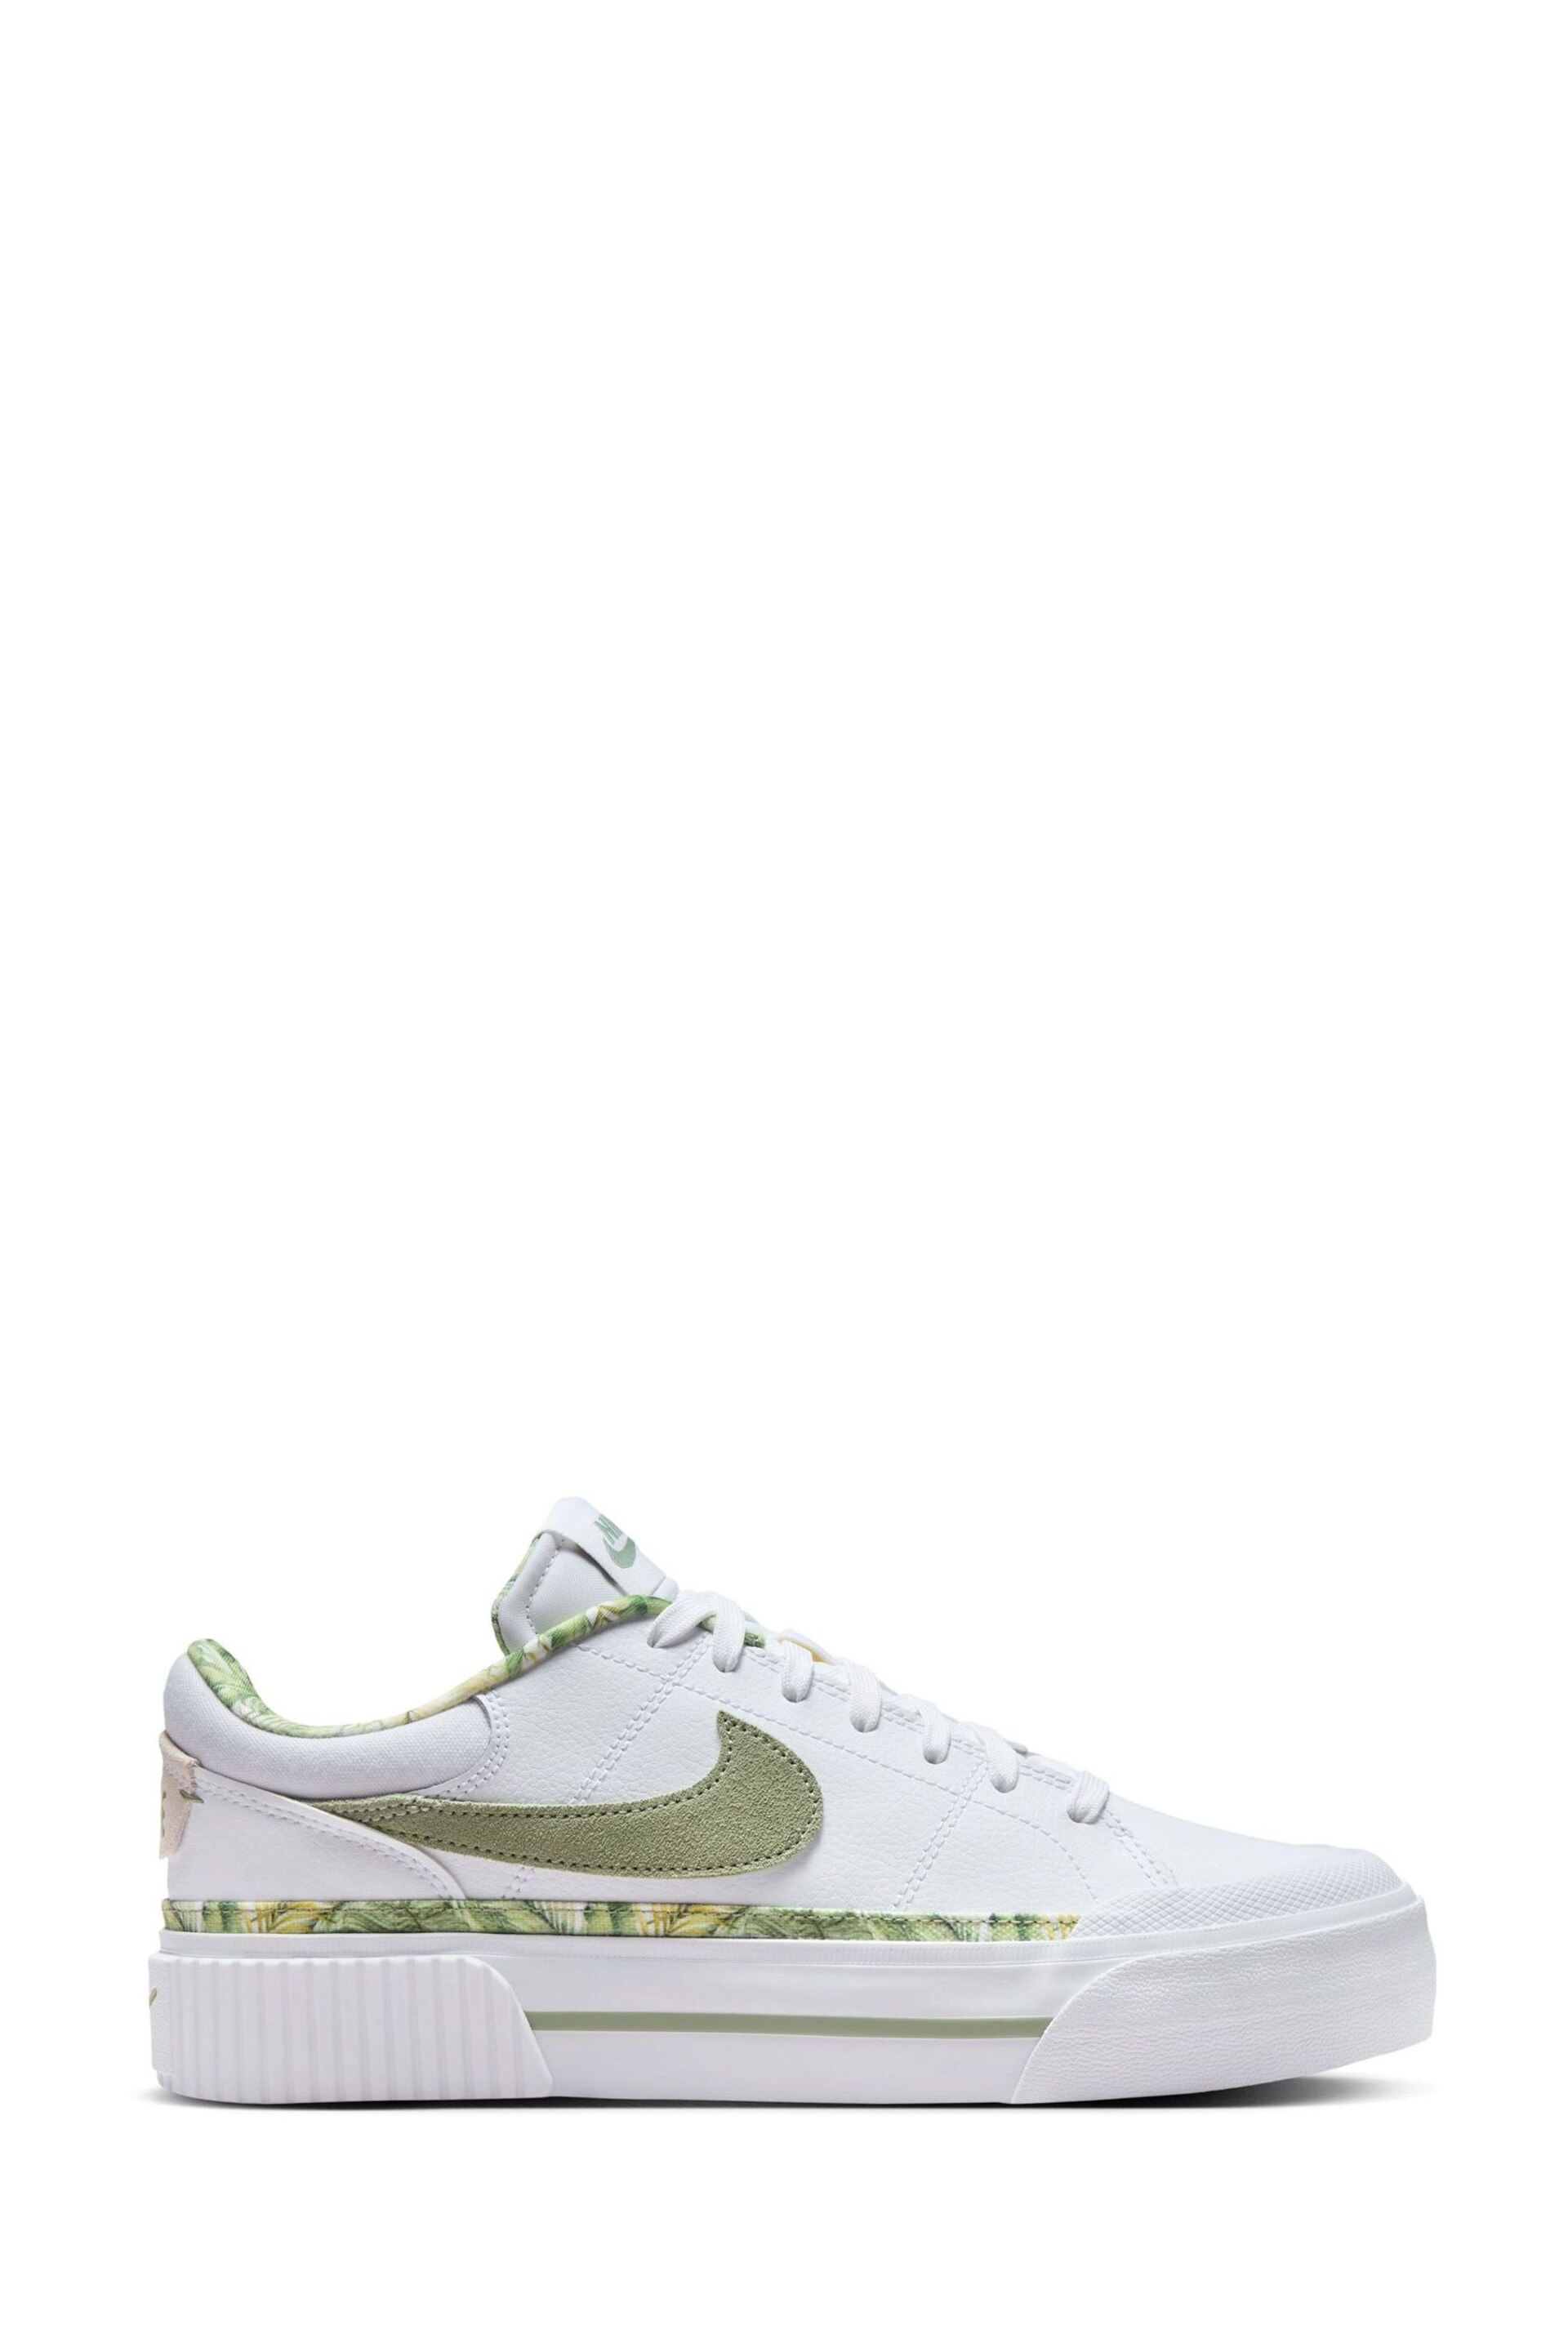 Nike White Court Legacy Lift Trainers - Image 2 of 10